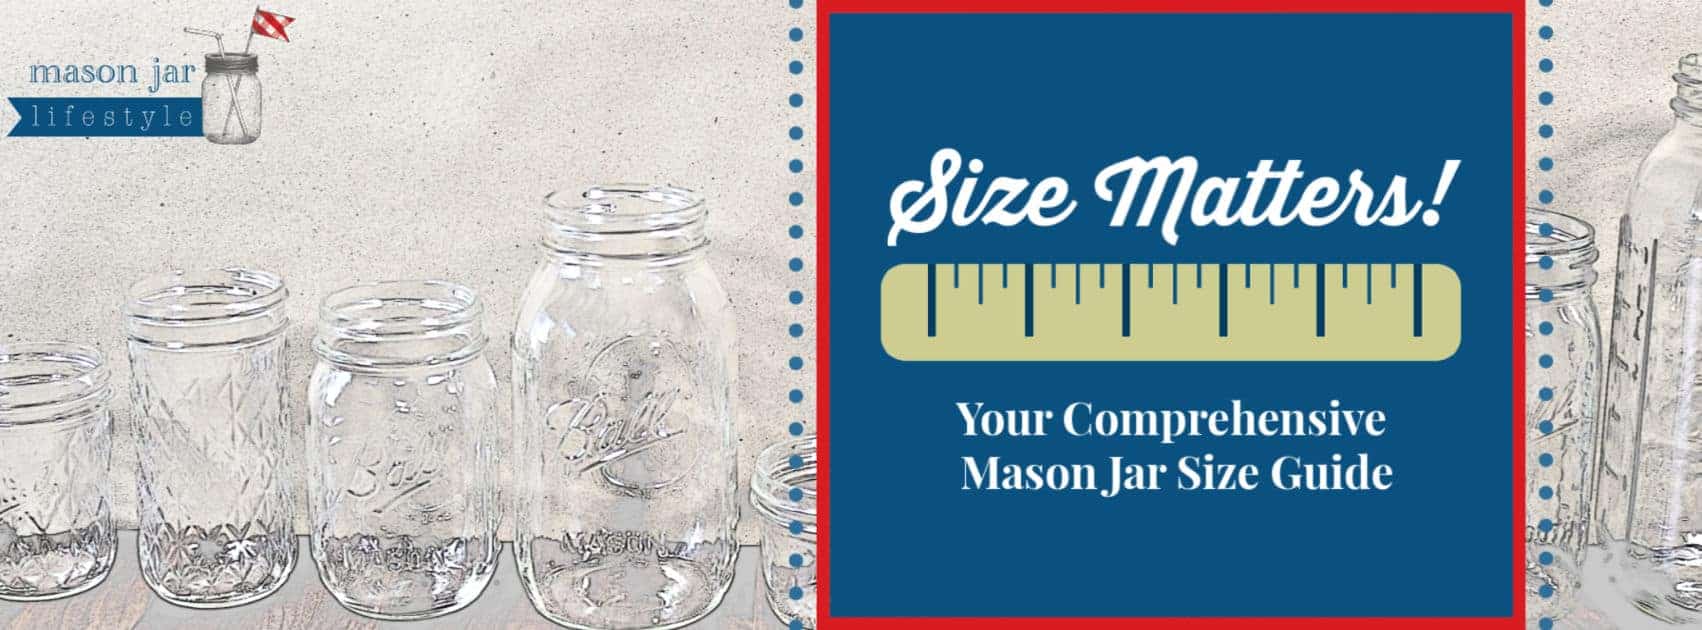 Why have Mason jars recently become so popular as a glass to drink